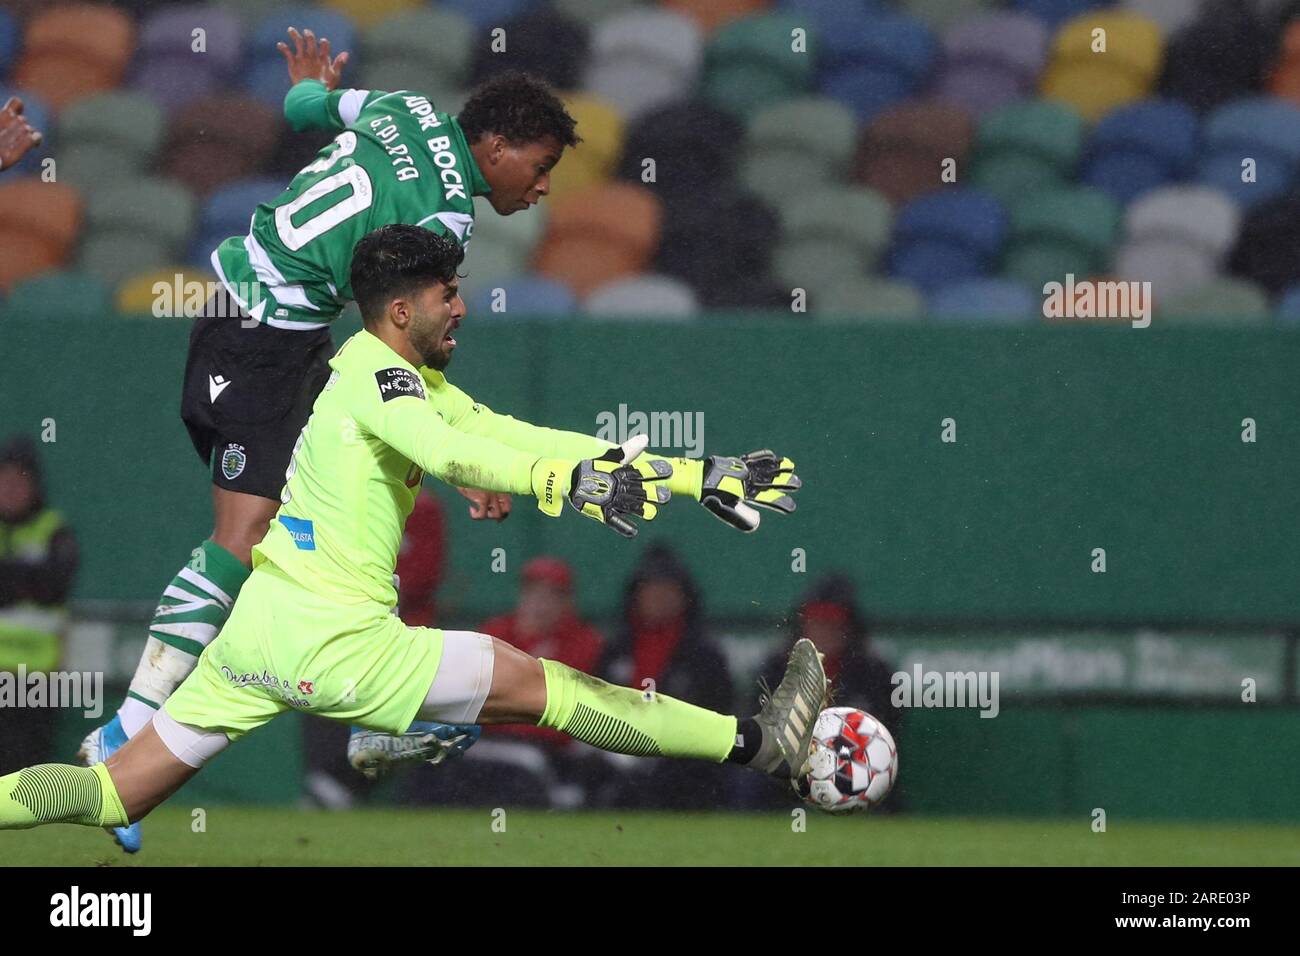 Lisbon. 27th Jan, 2020. Gonzalo Plata (L) of Sporting CP vies with Amir Abedzadeh of CS Maritimo during the Portuguese League football match between Sporting CP and CS Maritimo at Jose Alvalade stadium in Lisbon, Portugal on Jan. 27, 2020. Credit: Pedro Fiuza/Xinhua/Alamy Live News Stock Photo